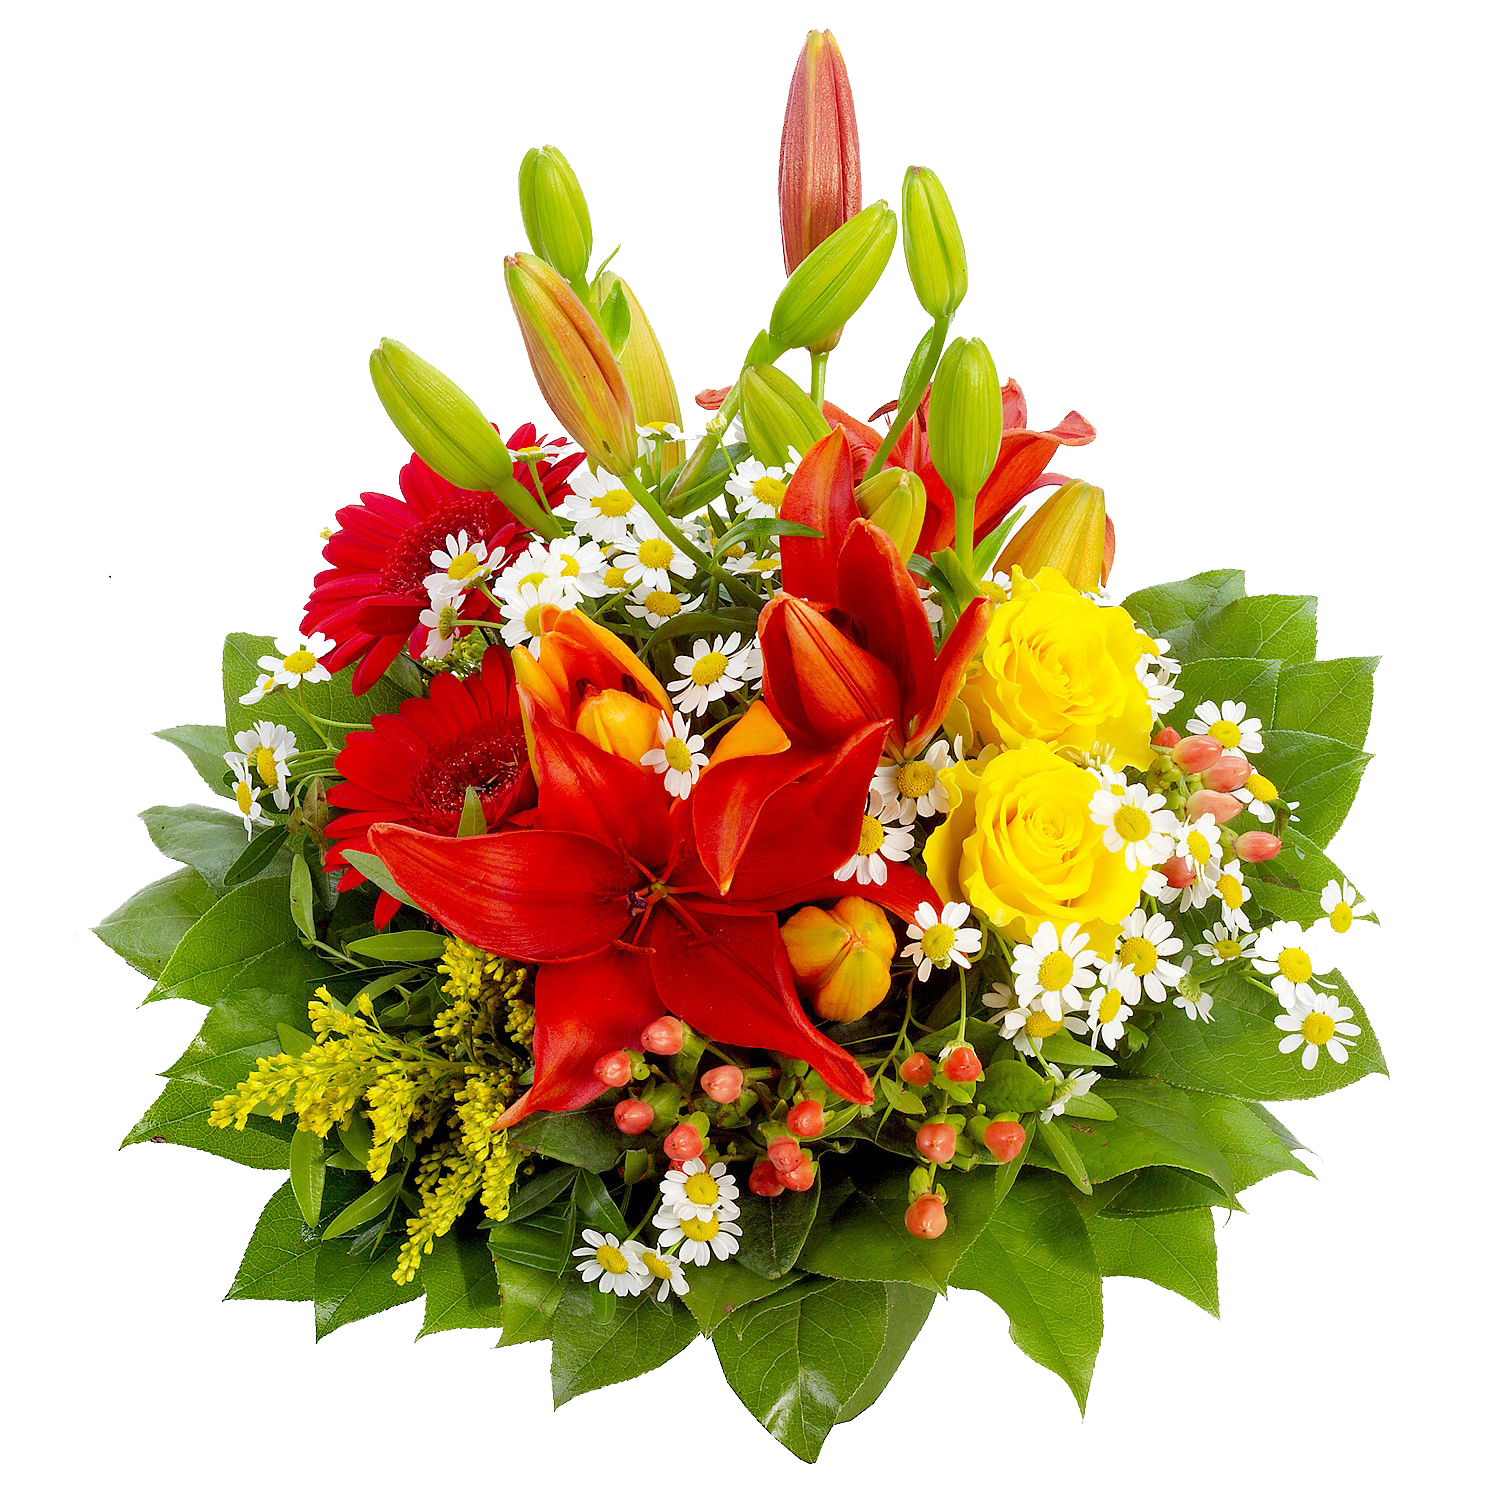 Birthday Flowers Bouquet Png Image - Birthday Flowers, Transparent background PNG HD thumbnail